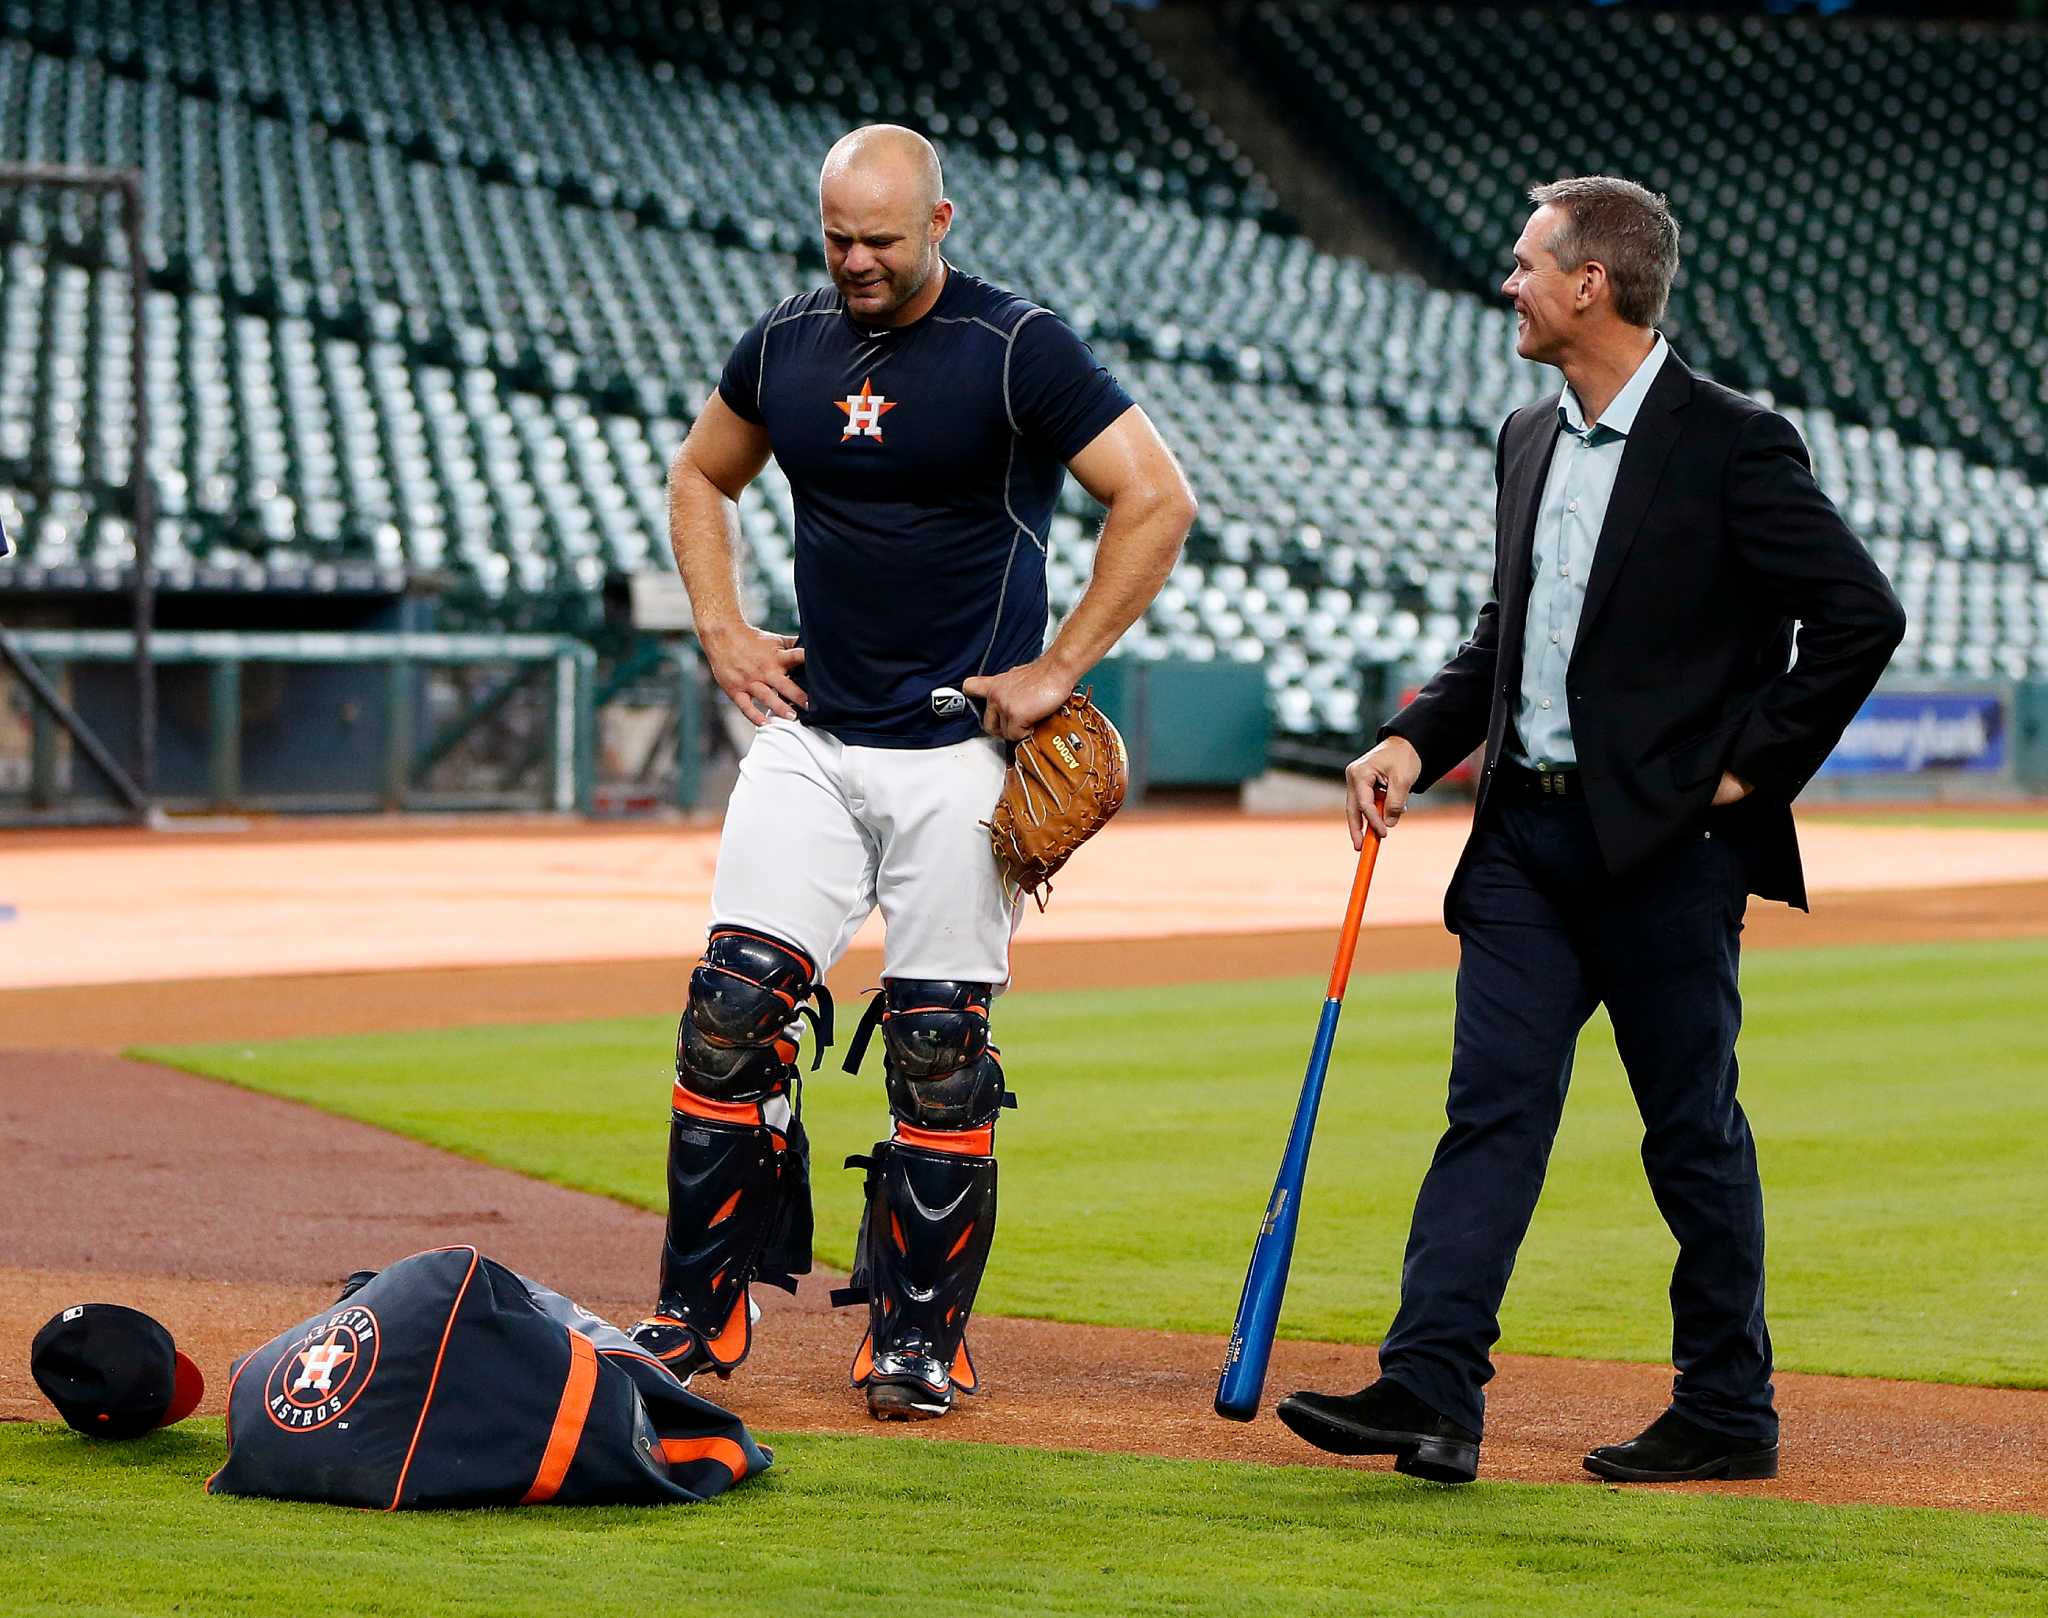 Houston Astros: Evan Gattis should get more playing time at catcher